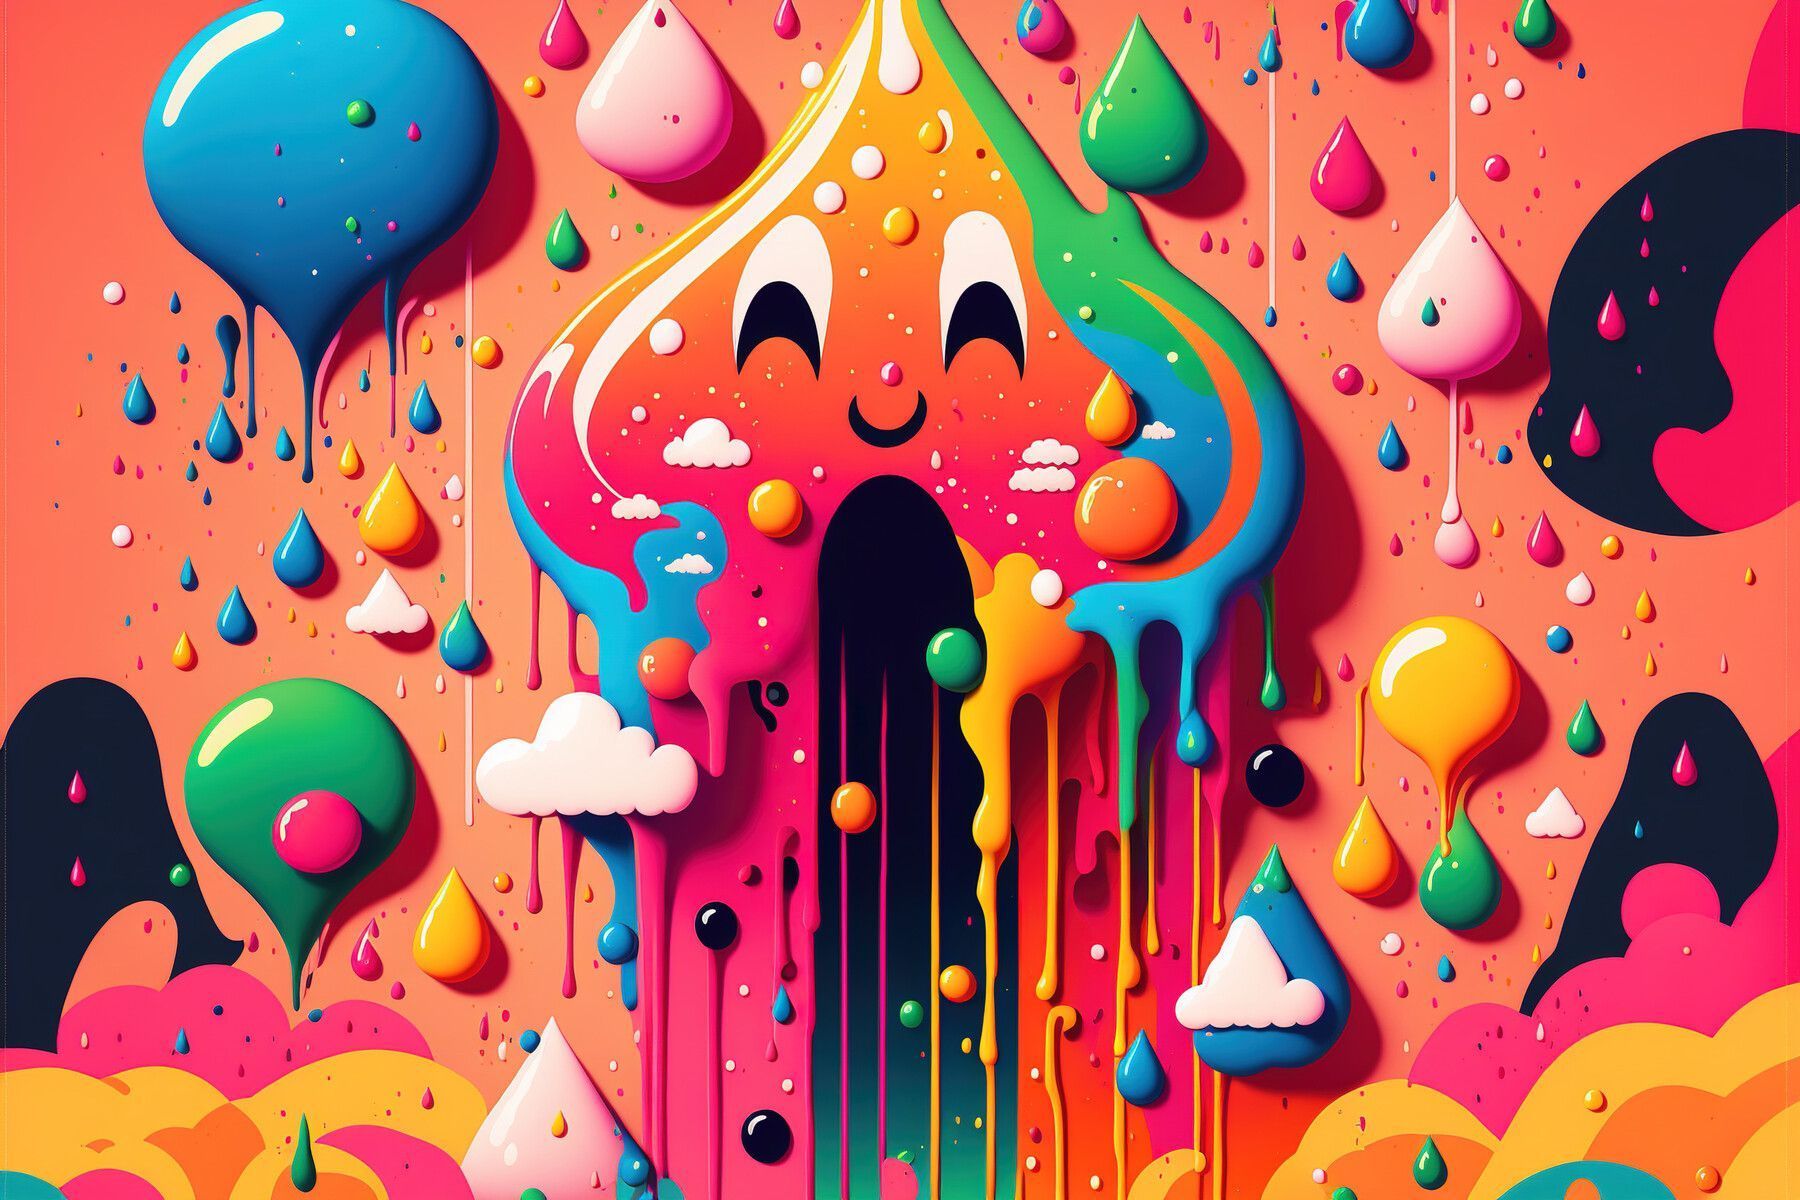 Digital Print Download of Psychedelic Paint Drip Rainbow Rain Clouds 1.2 Dripping Paint Rainy Landscape / Illustration / Reference Art